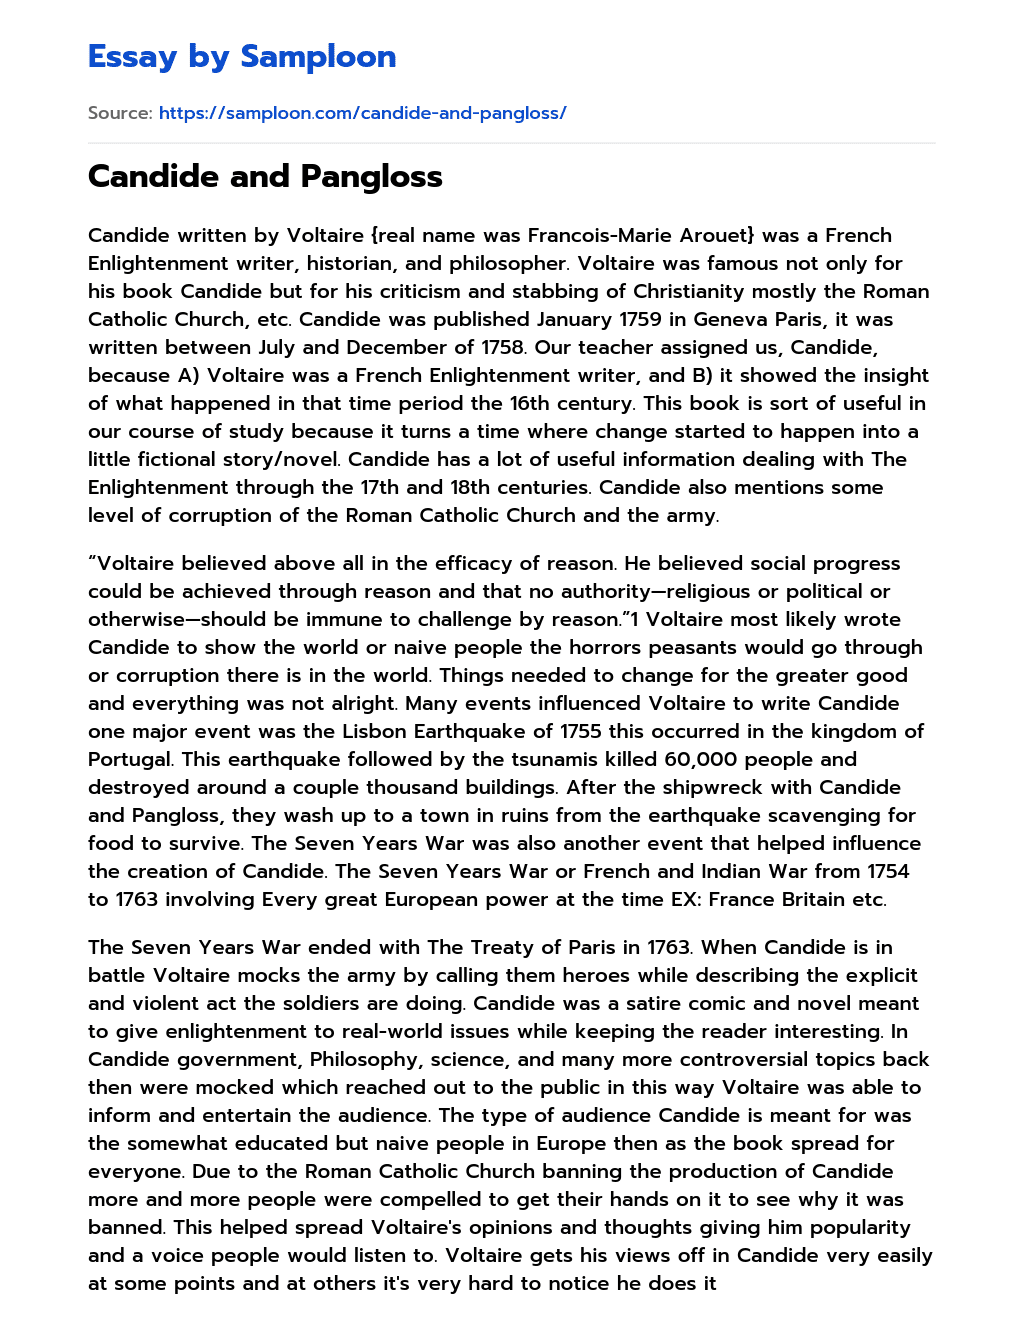 Candide and Pangloss essay